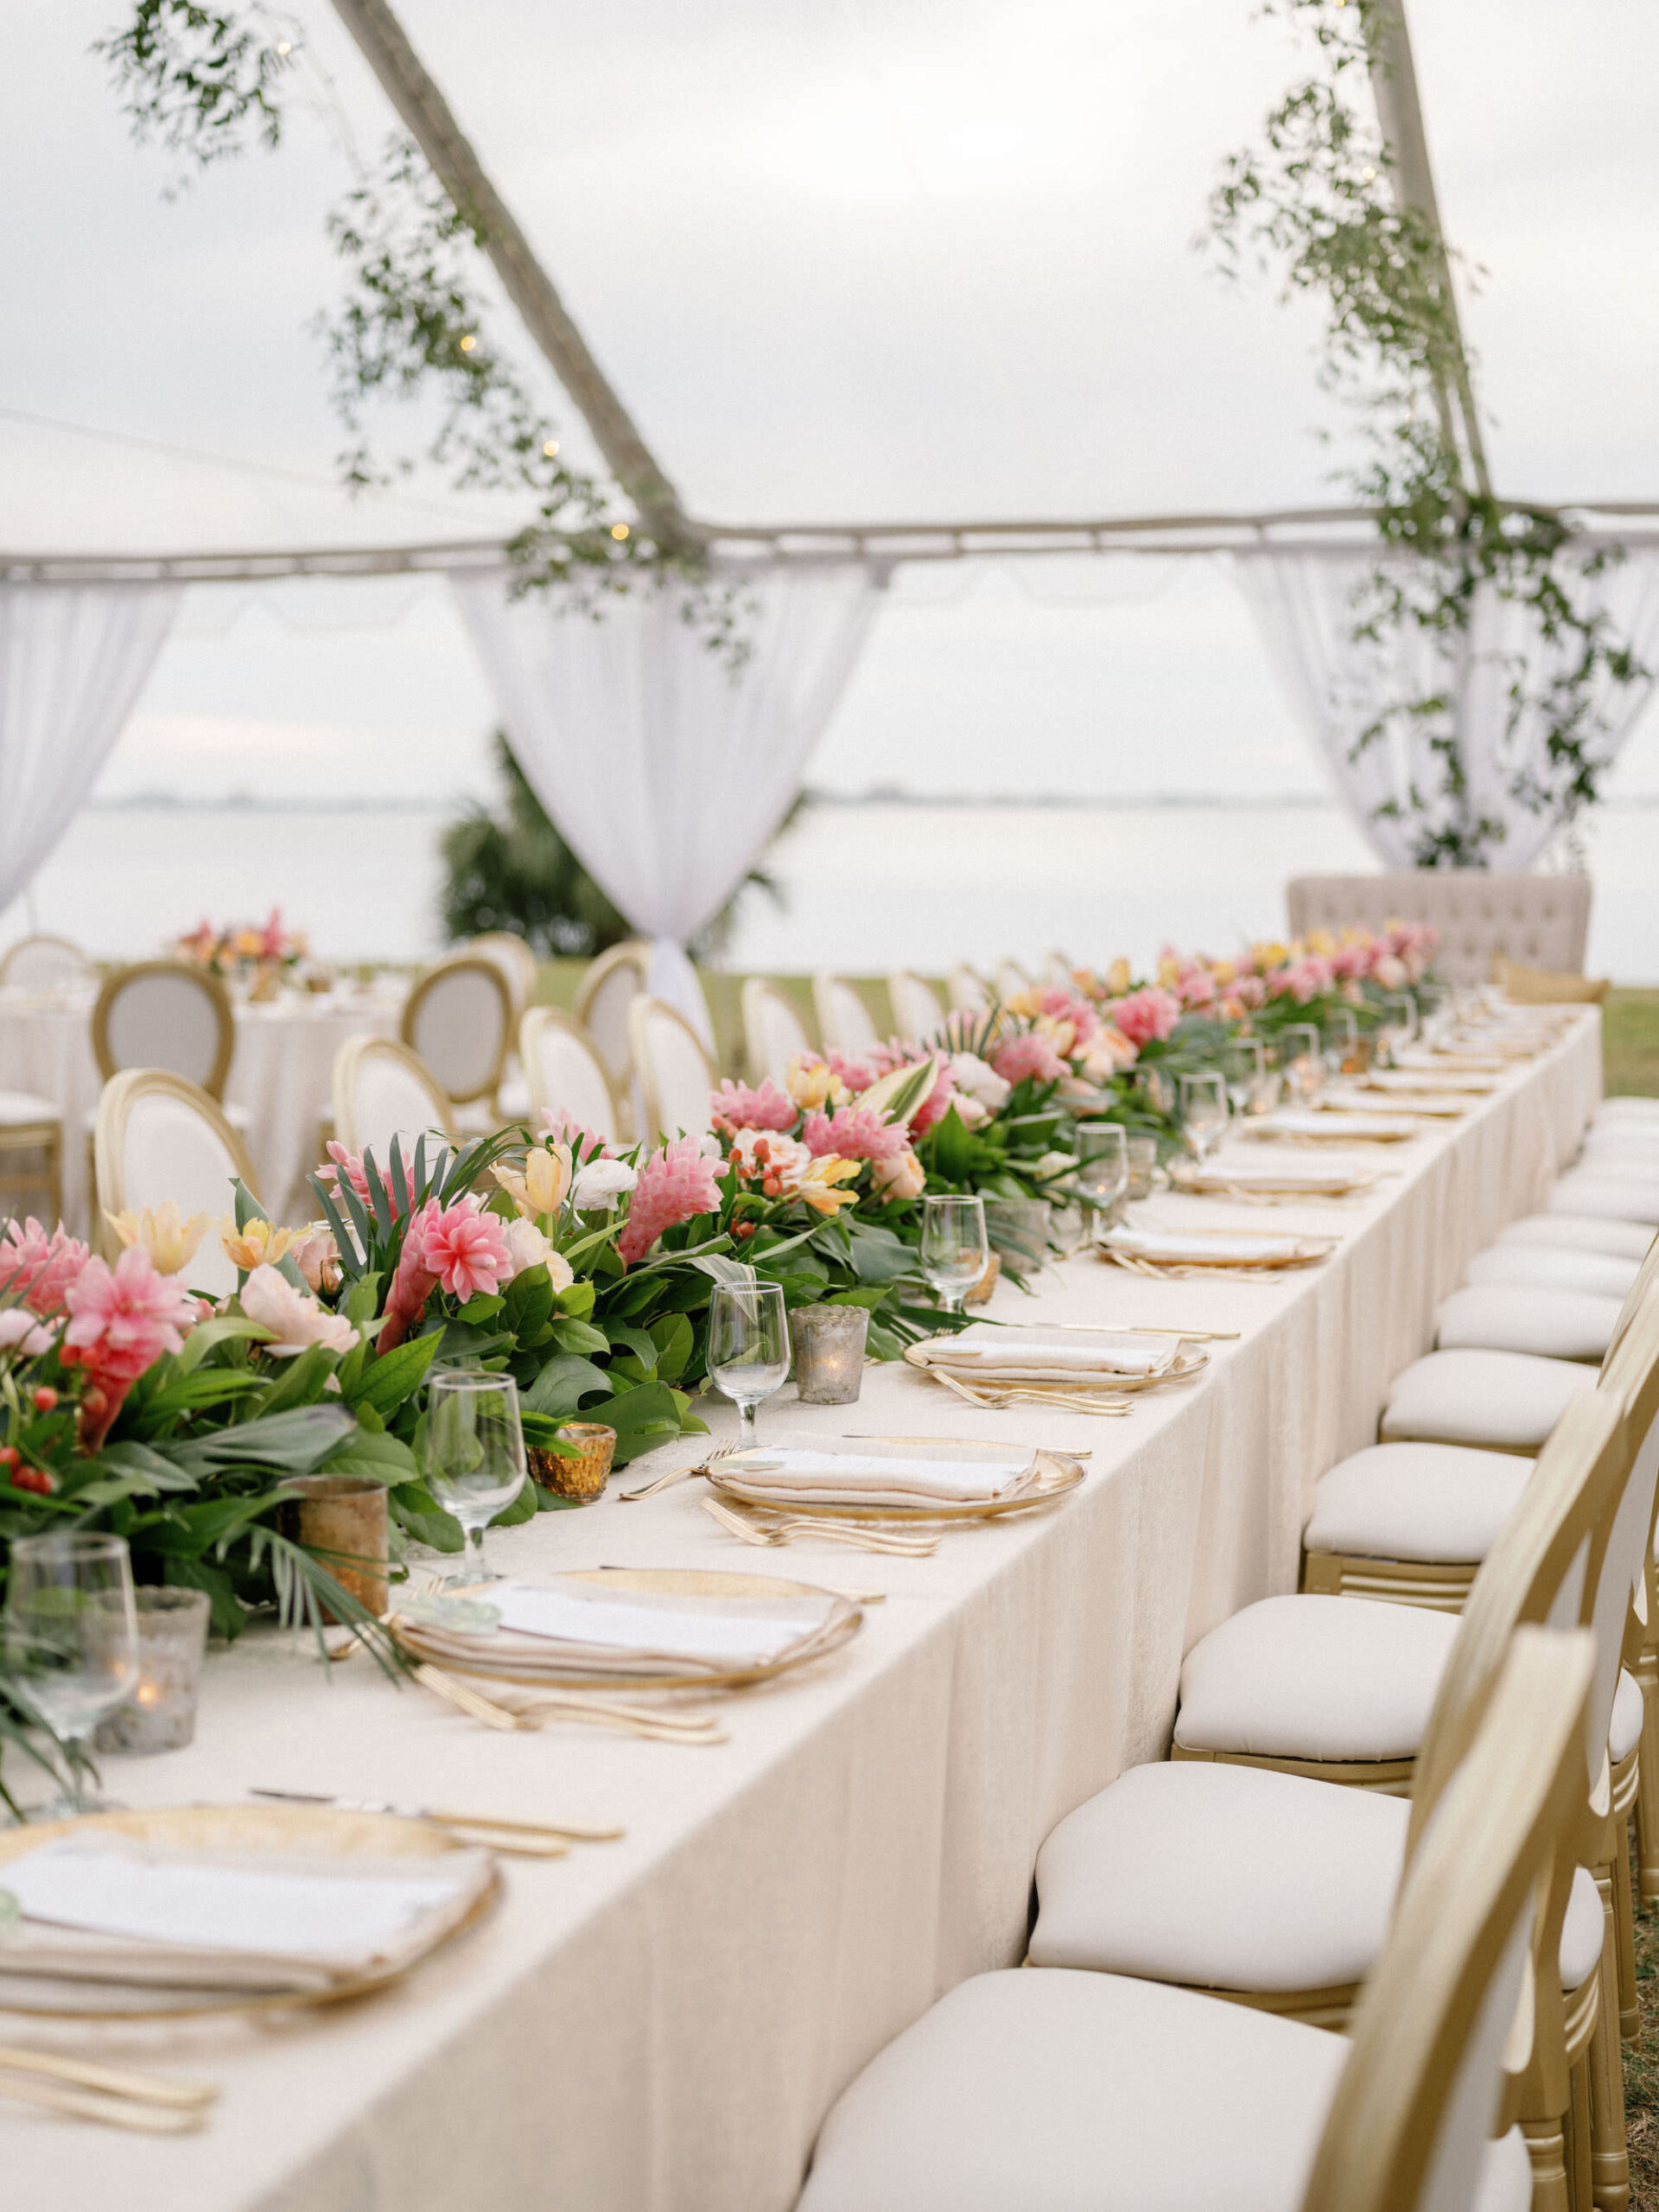 Luxurious Classic Wedding Reception Decor, Long Feasting Table with Ivory Linens, Gold and Cream Dining Chairs, Gold Flatware, Lush Monstera Palm Leaves with Pink Ginger Tropical Flowers | Tampa Bay Wedding Florist Botanica International Design Studio